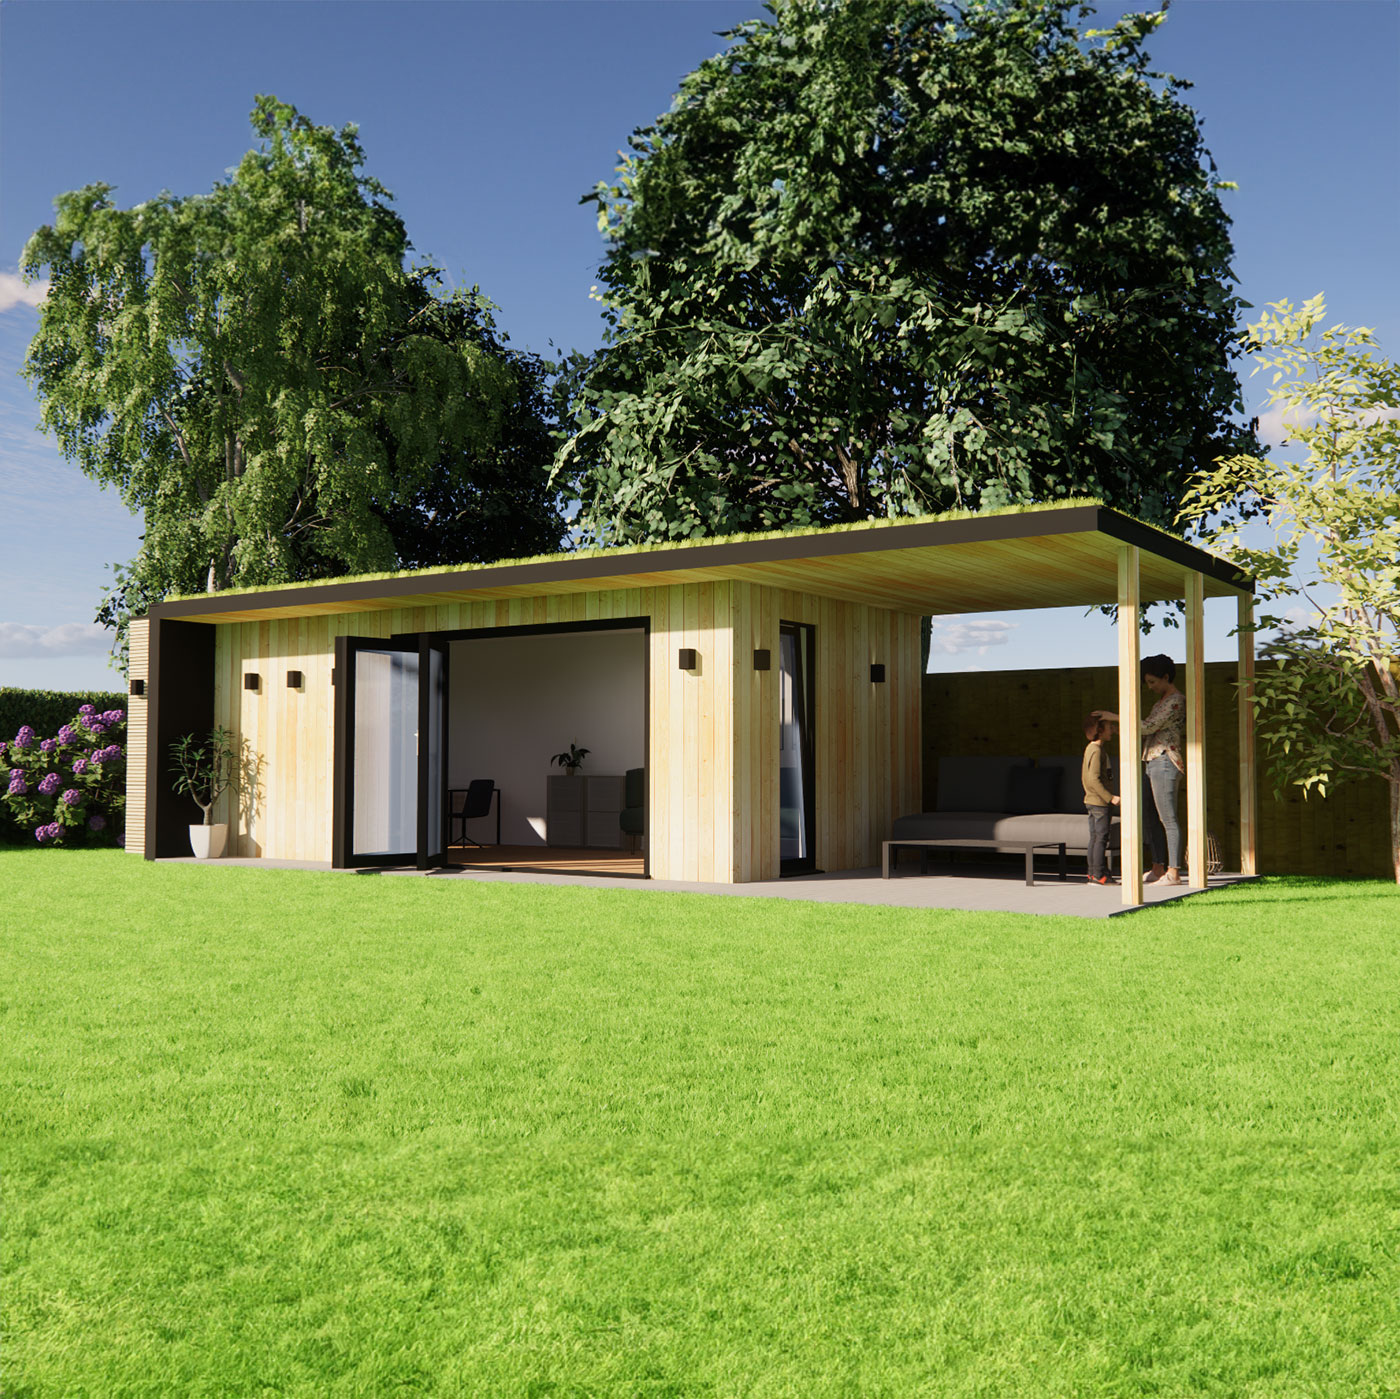 Visualisation of garden office with green roof 3.0m by 7.4m